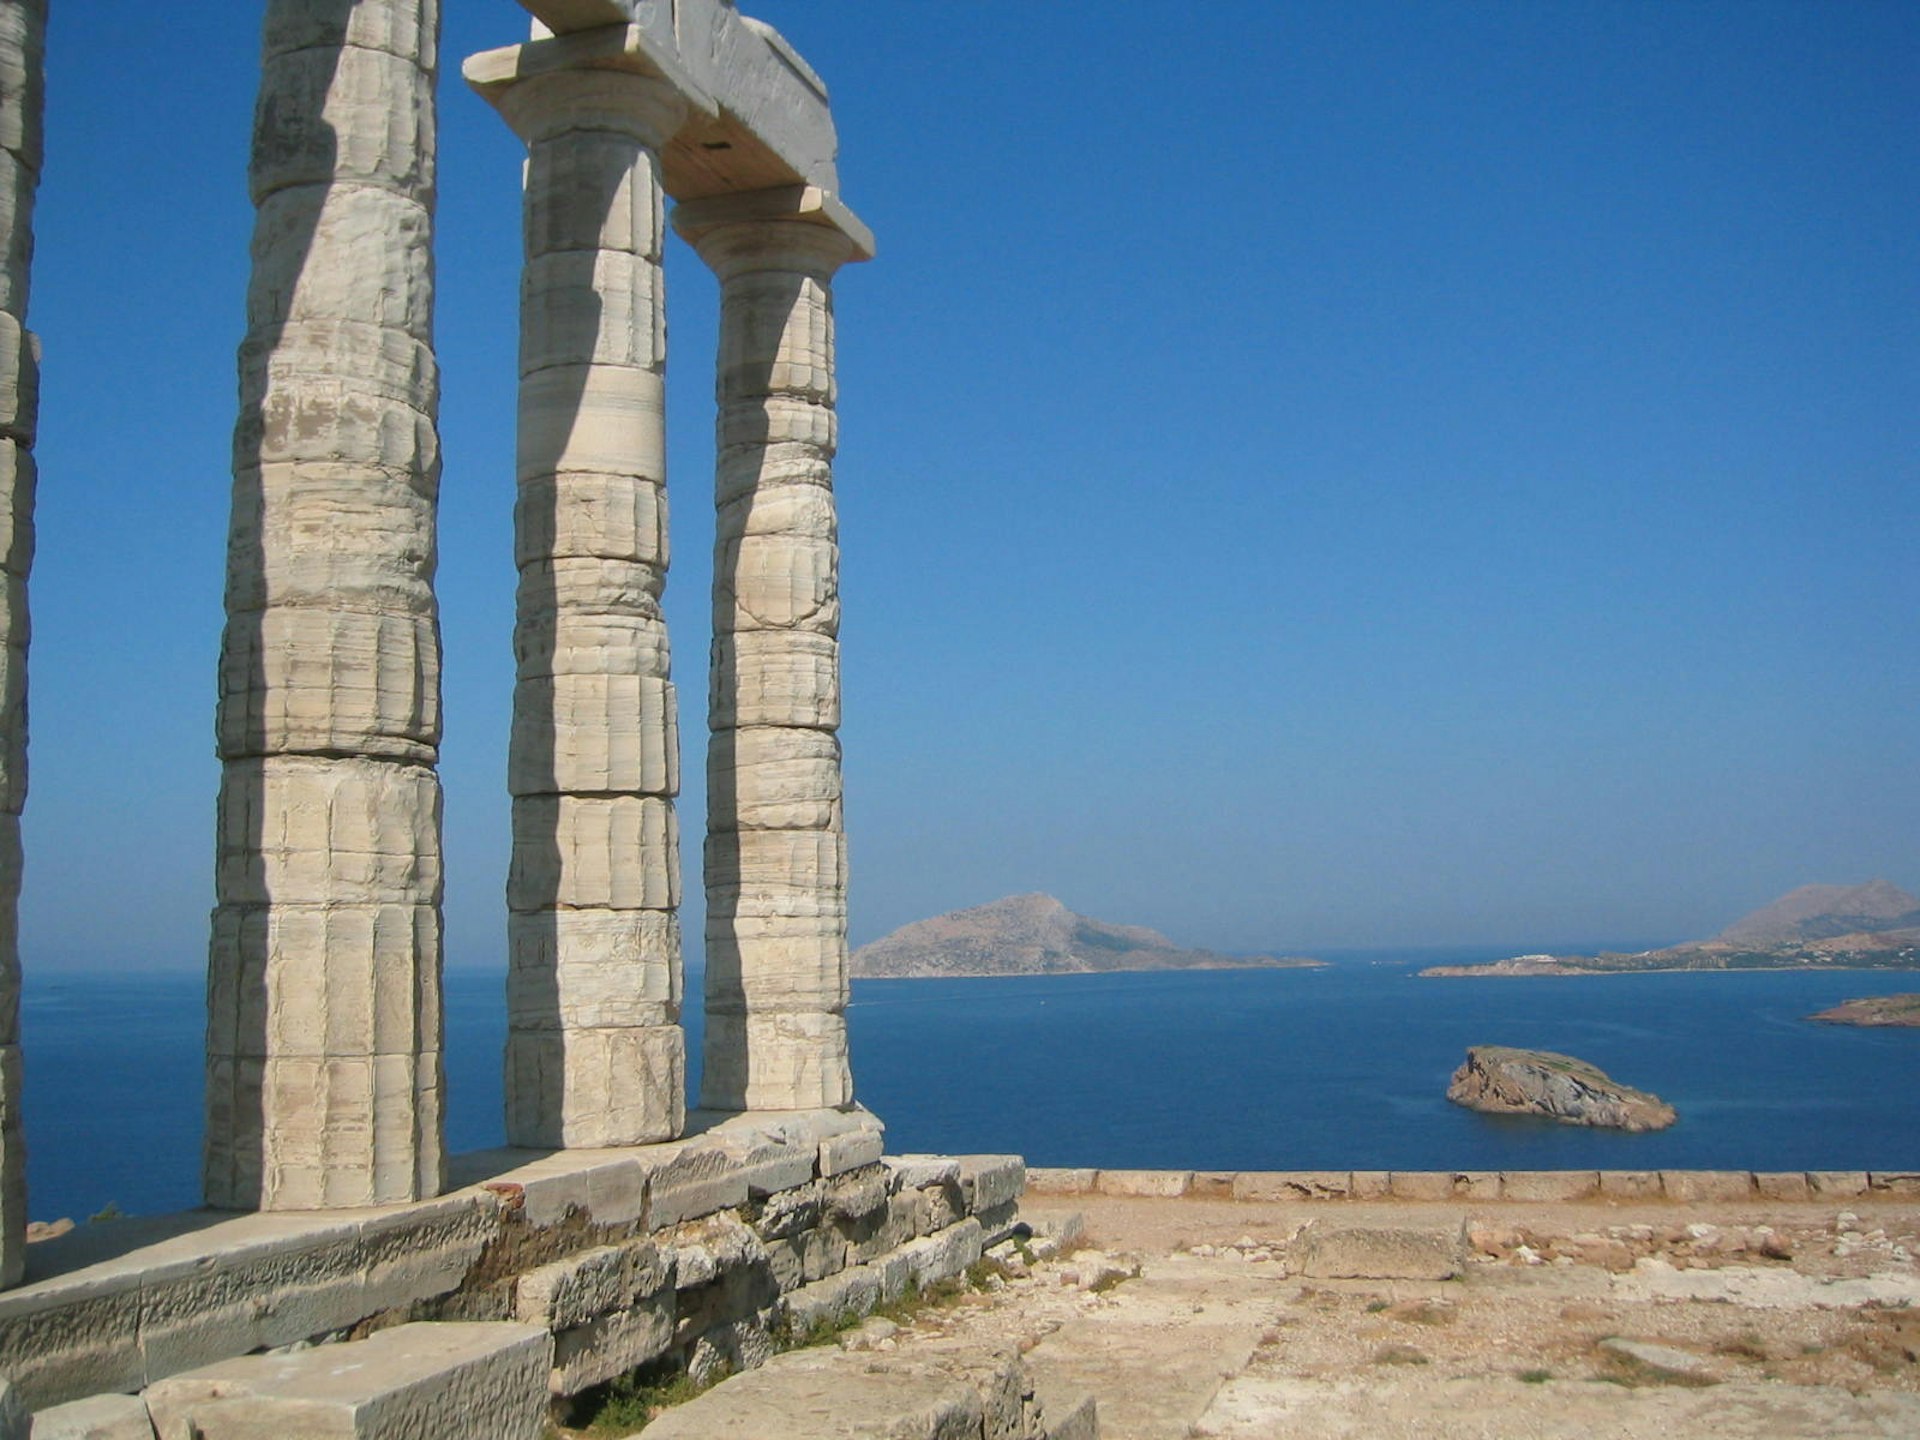 A view of the Temple of Poseidon